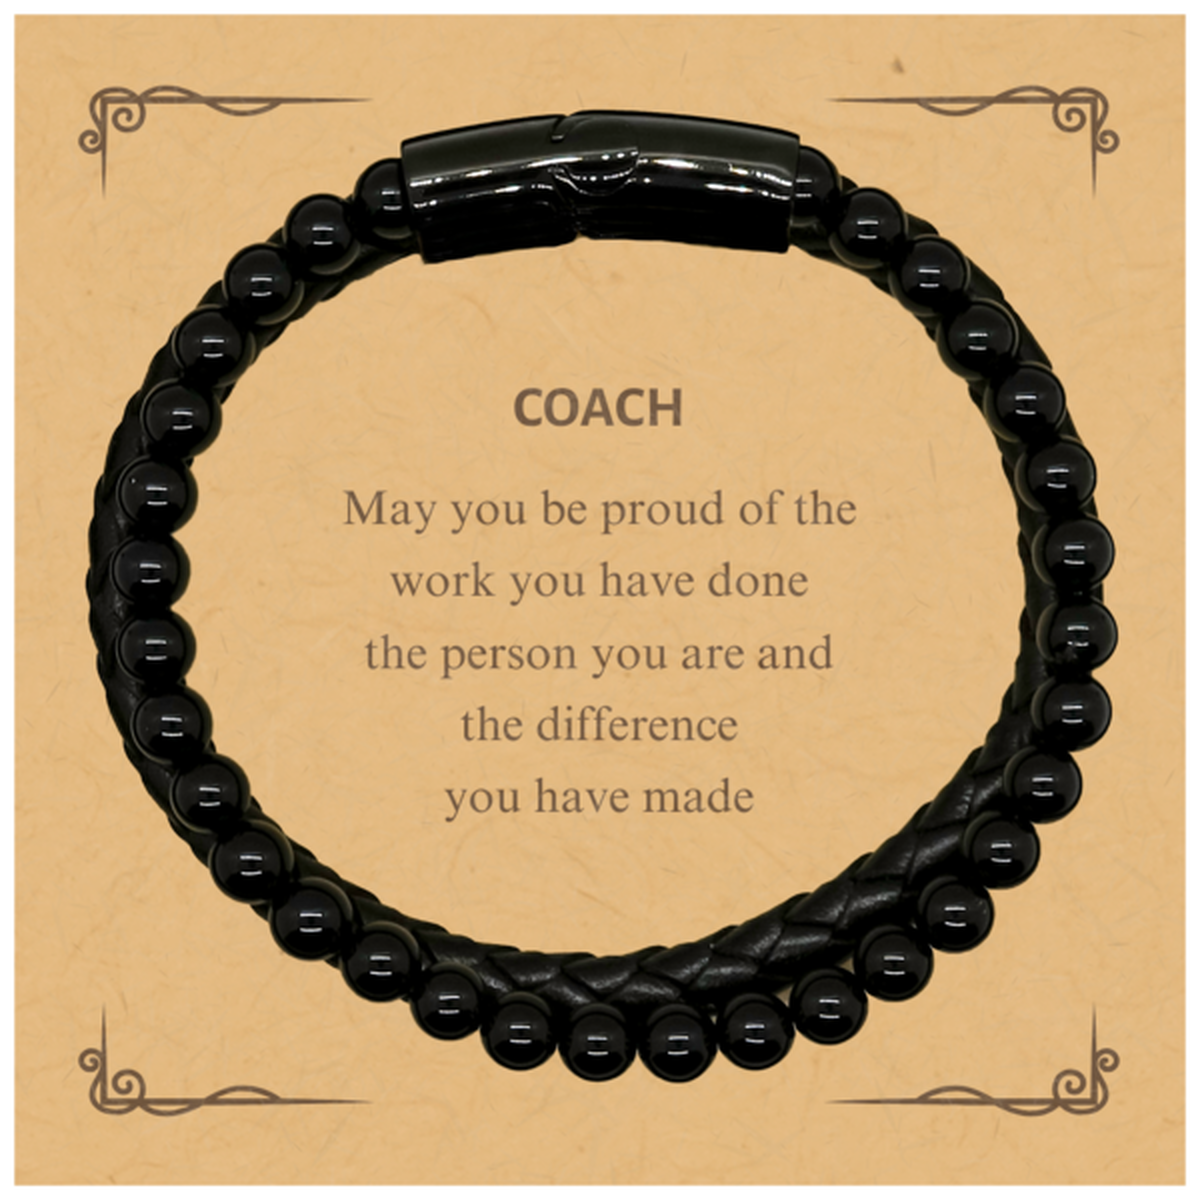 Coach May you be proud of the work you have done, Retirement Coach Stone Leather Bracelets for Colleague Appreciation Gifts Amazing for Coach